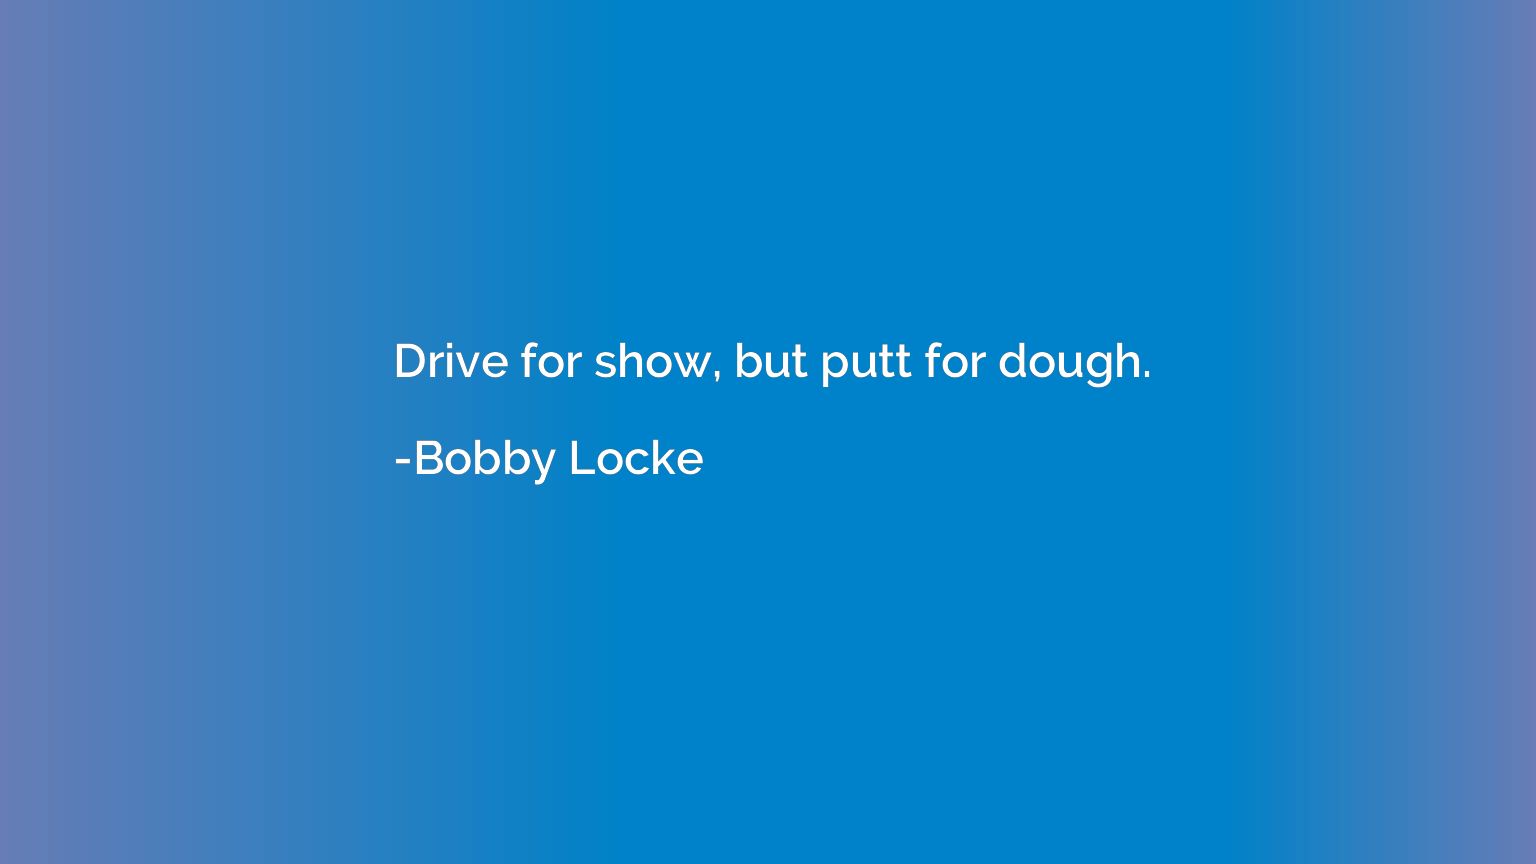 Drive for show, but putt for dough.